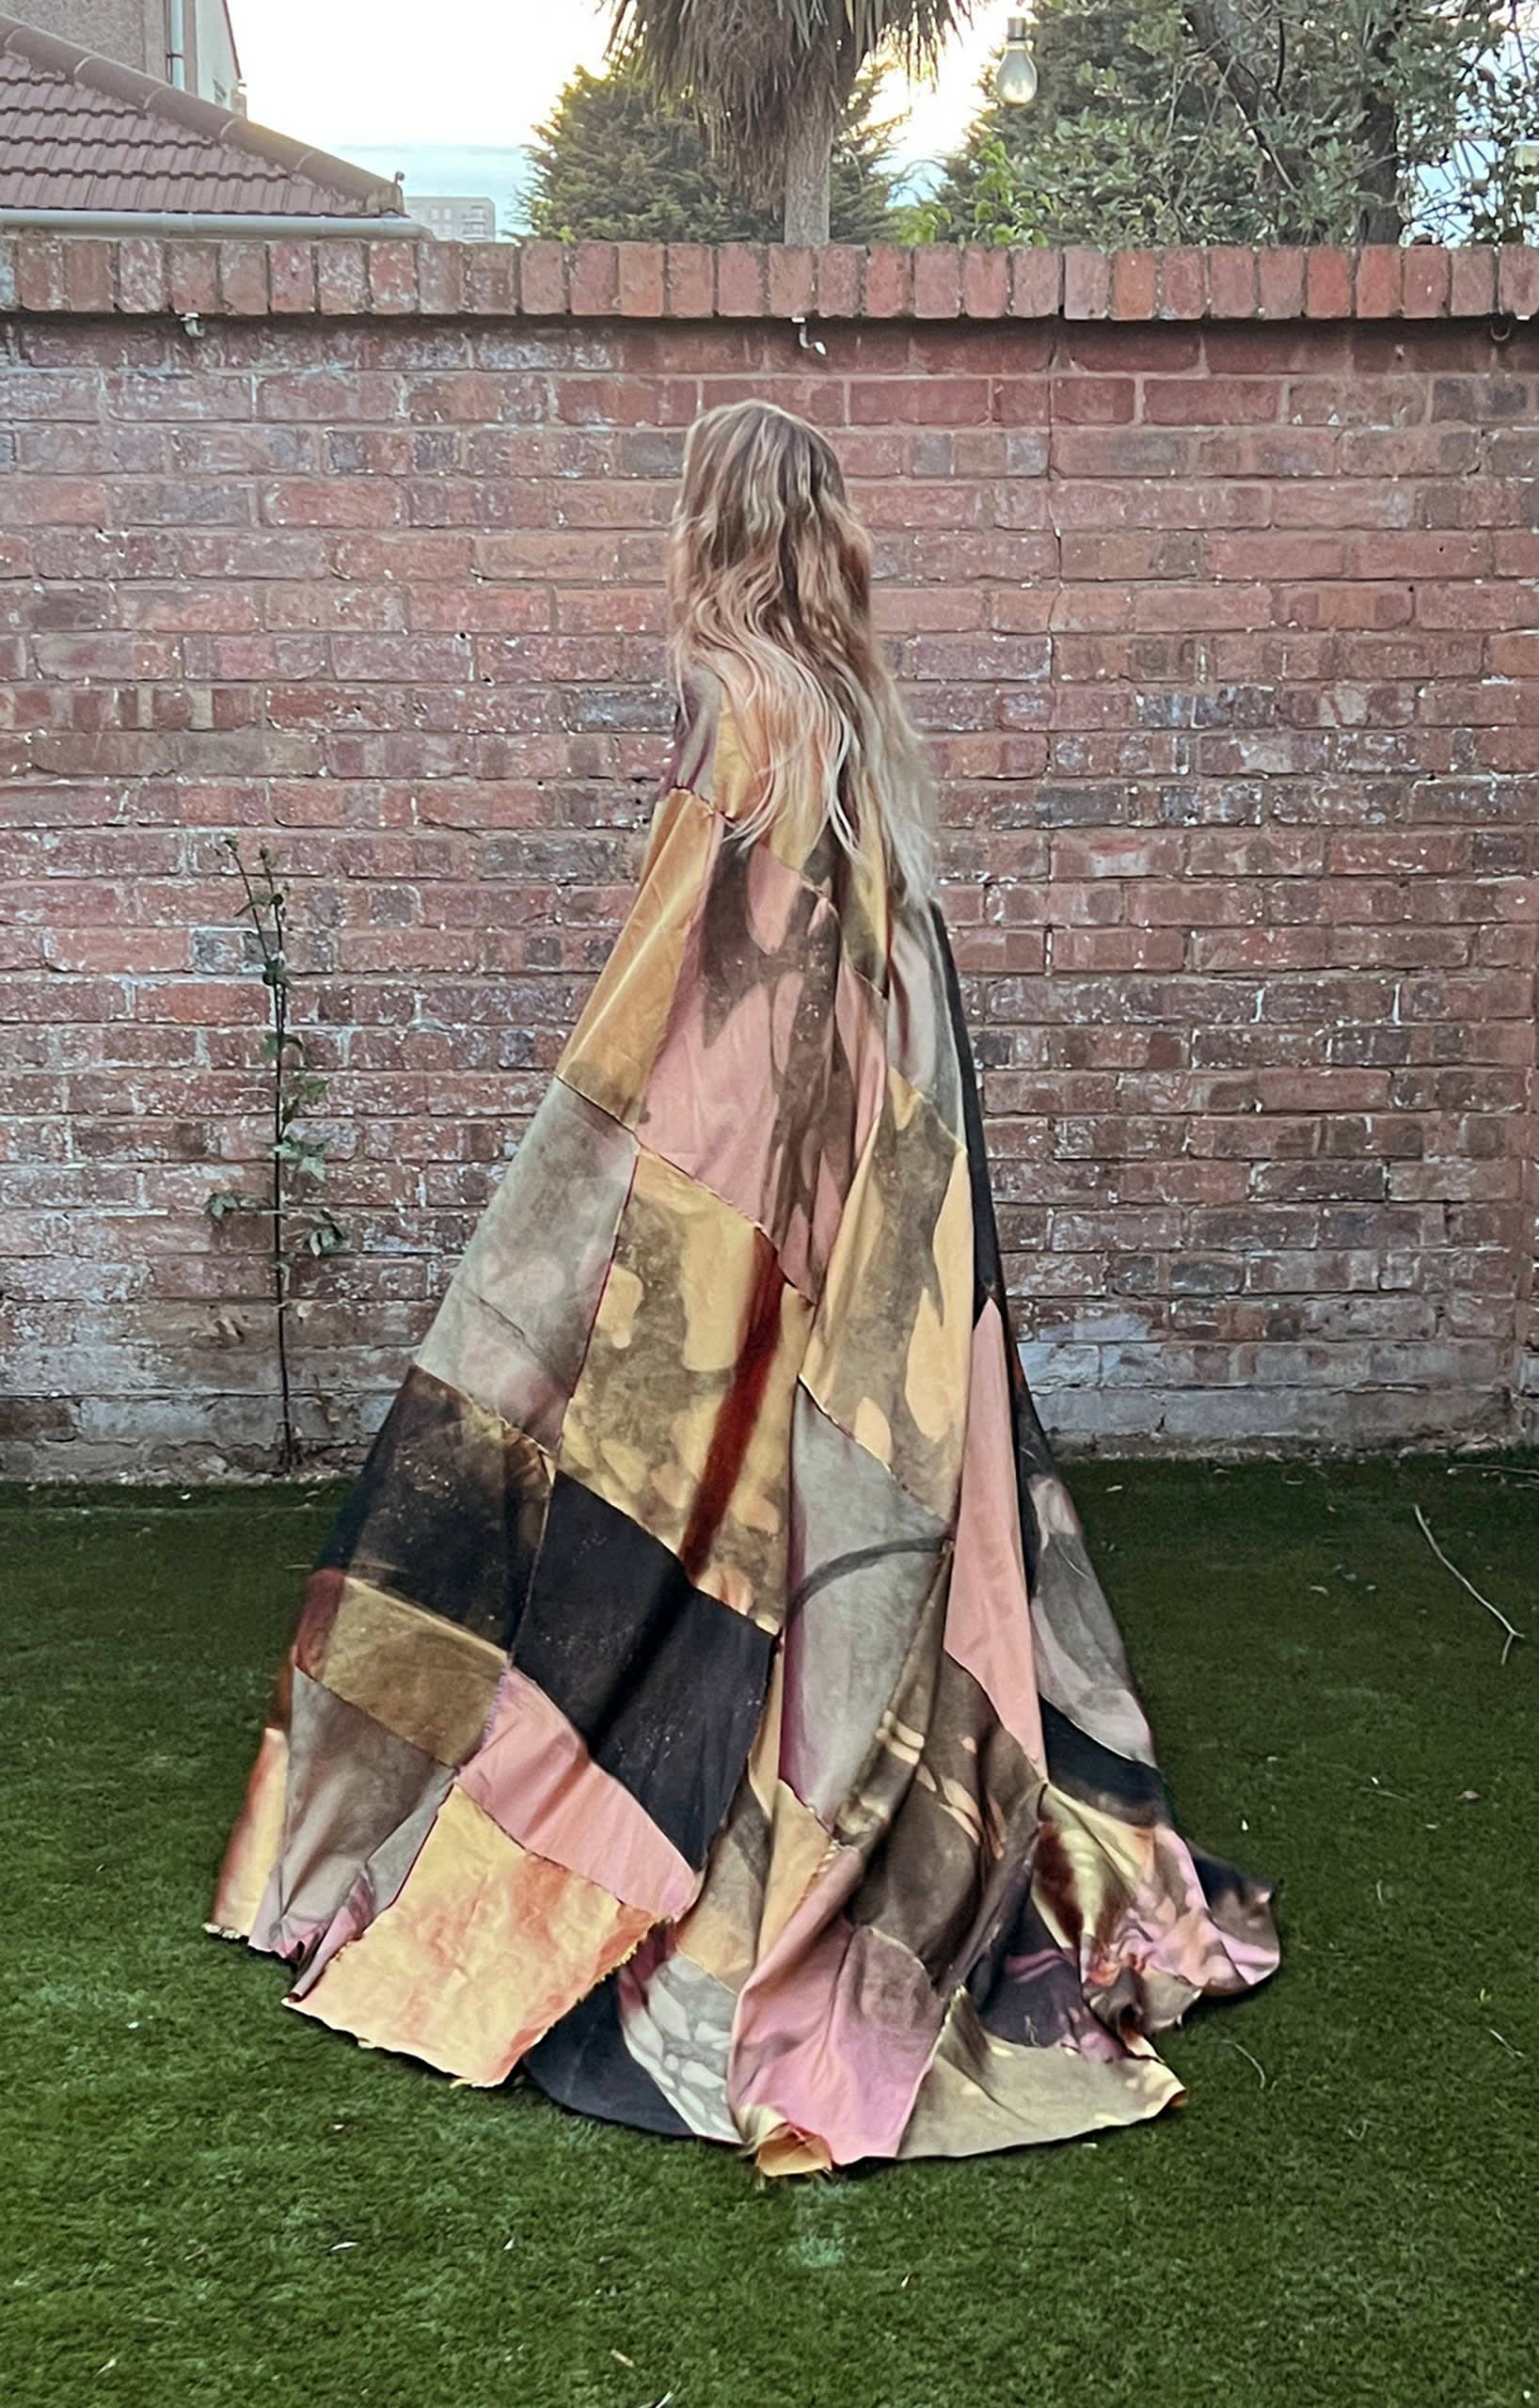 Photograph of a person with their back to the camera, standing on grass in front of a brick garden wall, wearing a long flowing coat or cape made from large squares of different patterned materials.